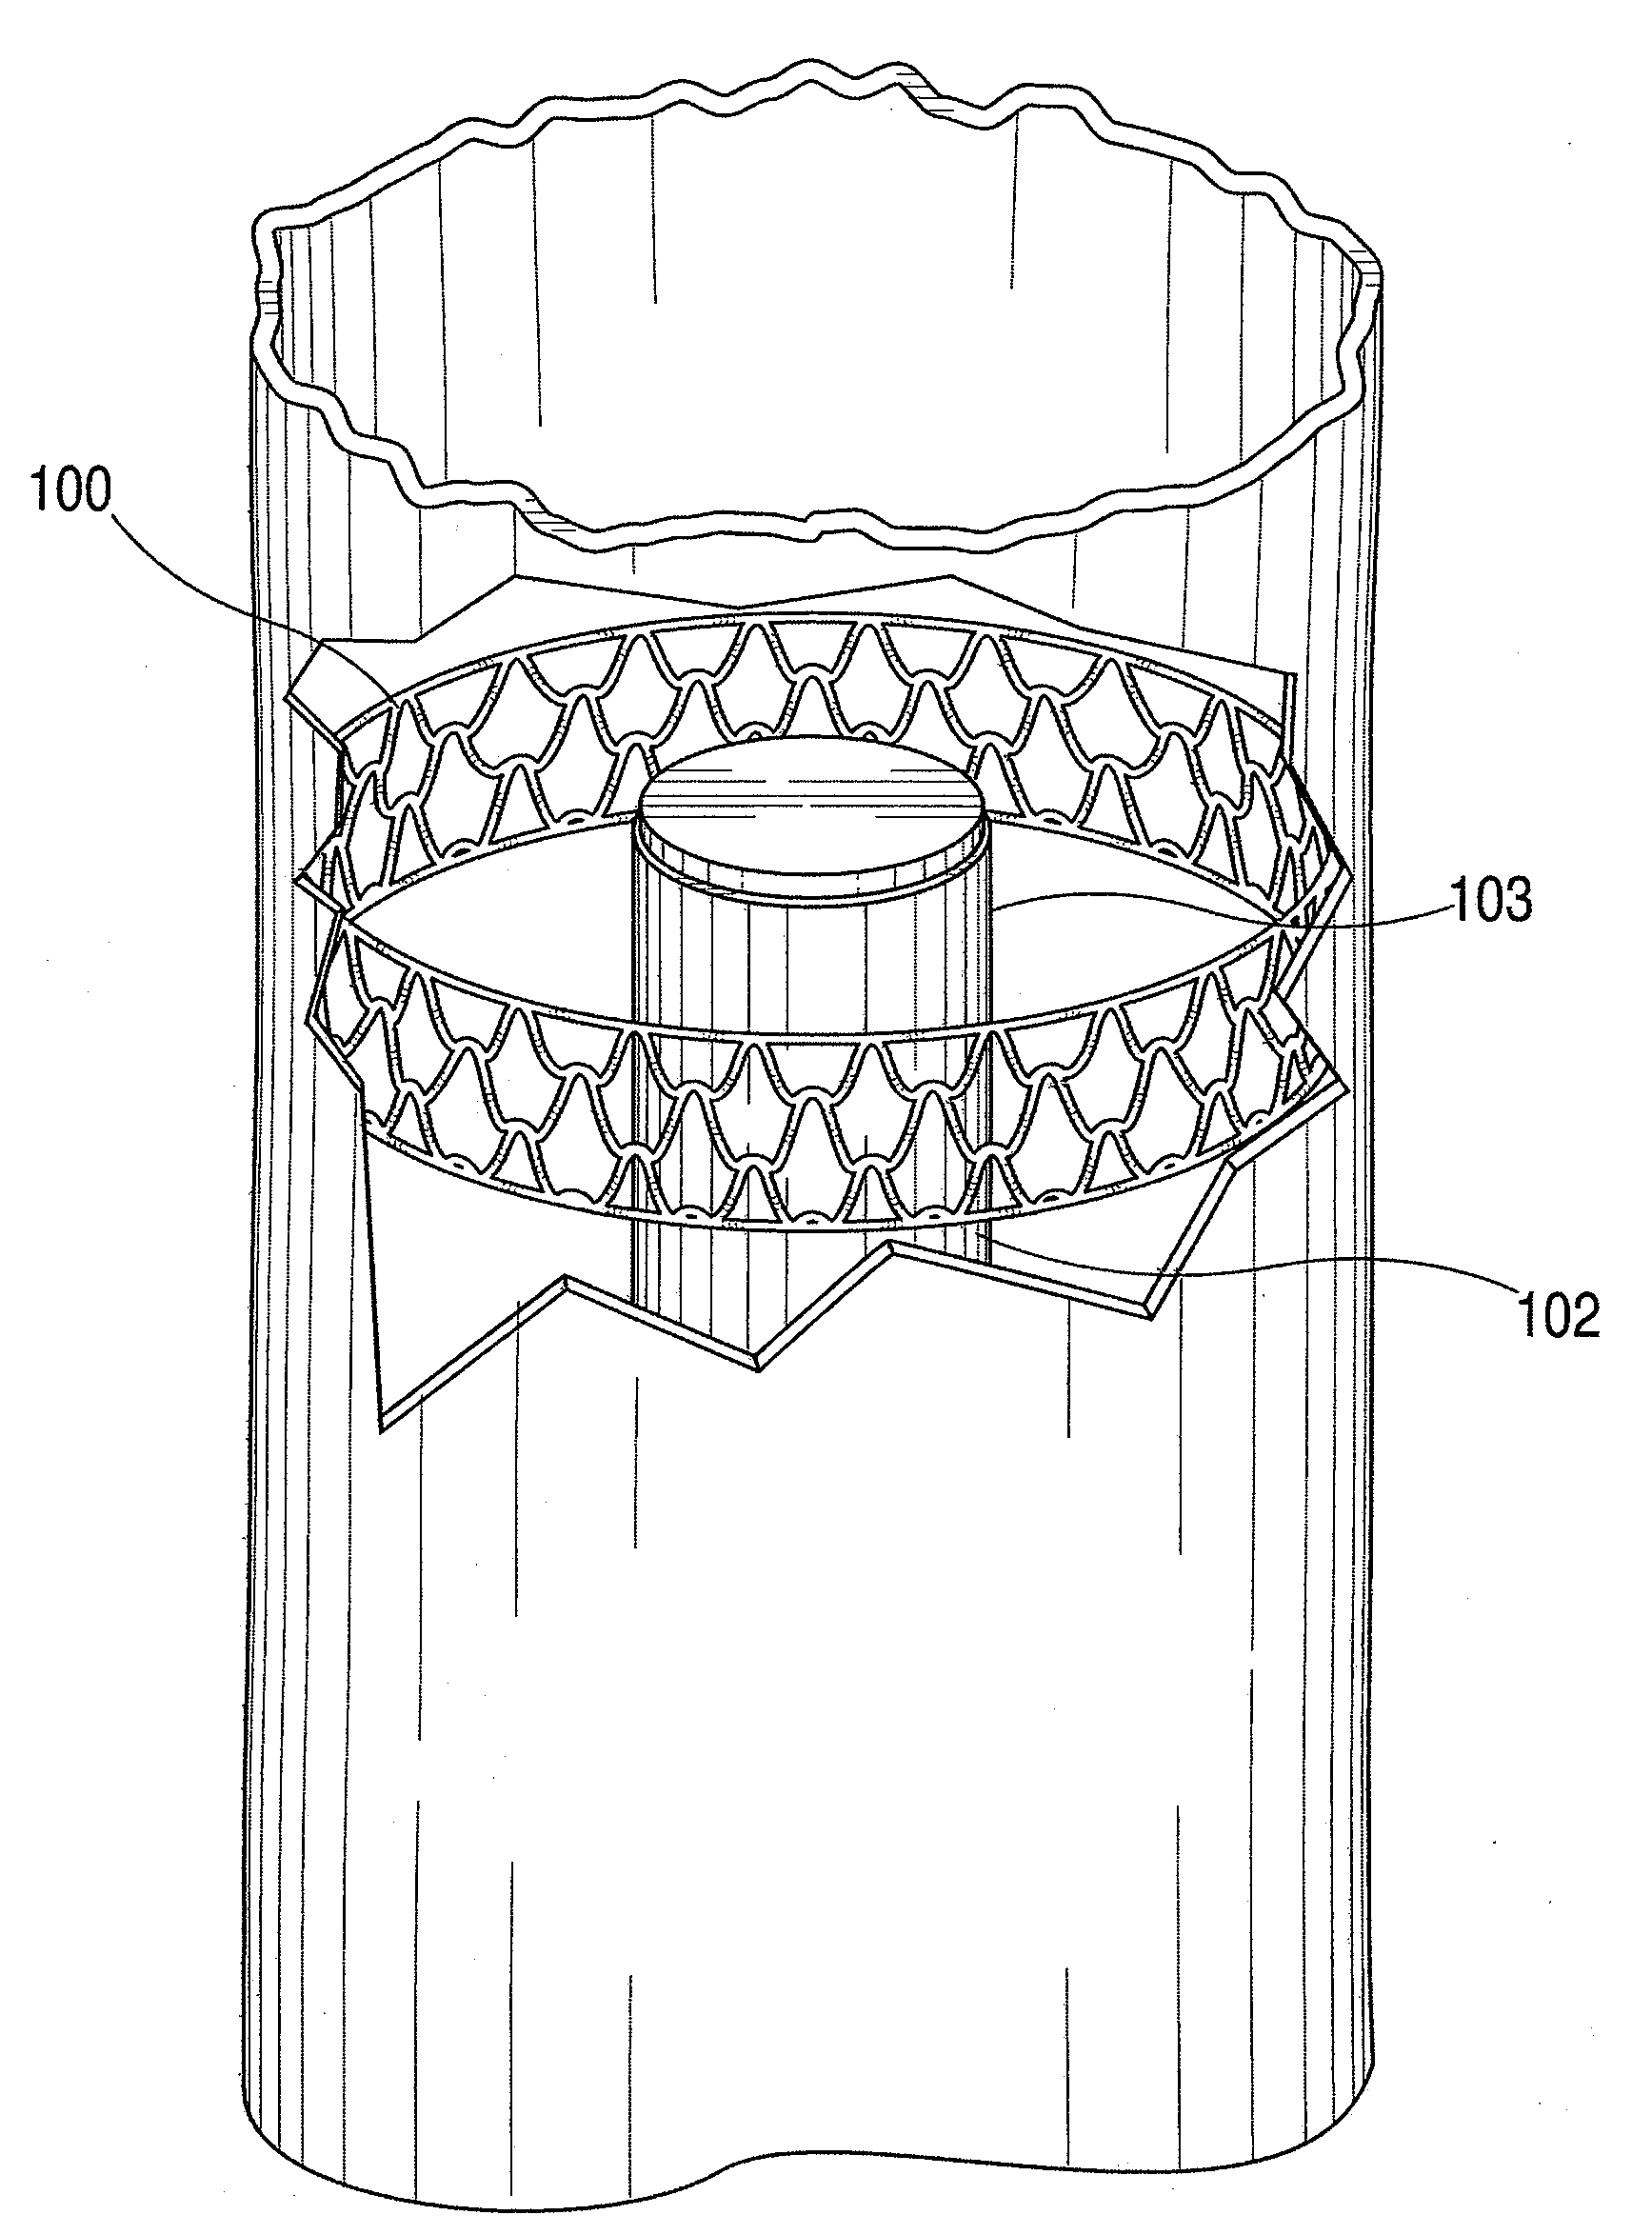 Minimal surface area contact device for holding plaque to blood vessel wall